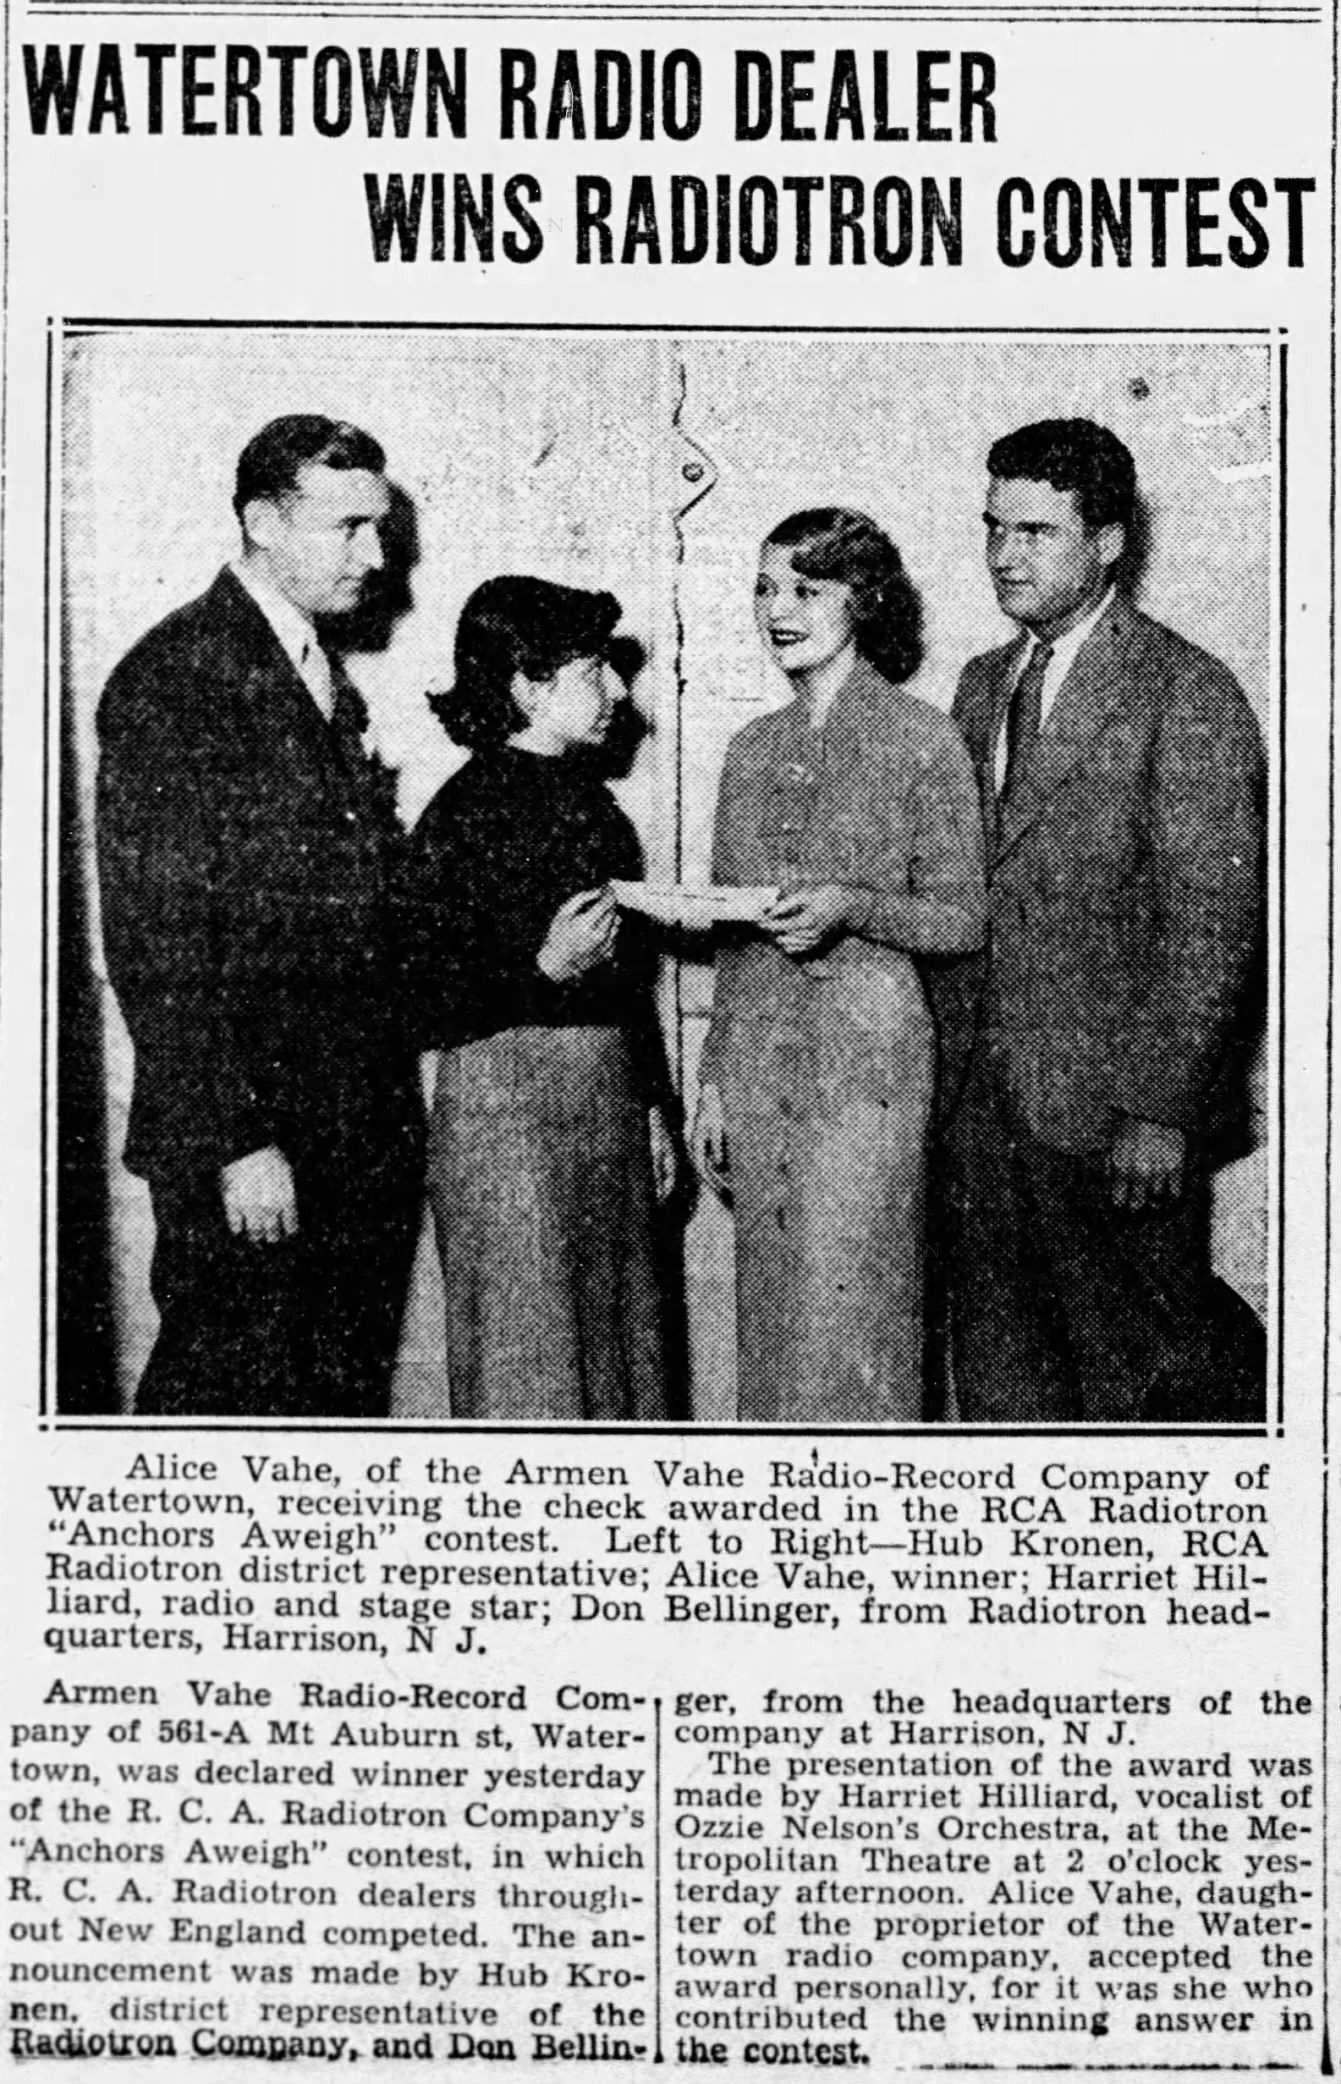  An article highlighting an award granted to Armen Vahe Radio-Record Co by RCA, showing Armen's neice, Alice Arozian (missidentified as his daughter) accepting the award, in the Friday September 14, 1934 issue of the Boston Globe. (image: Newspapers.